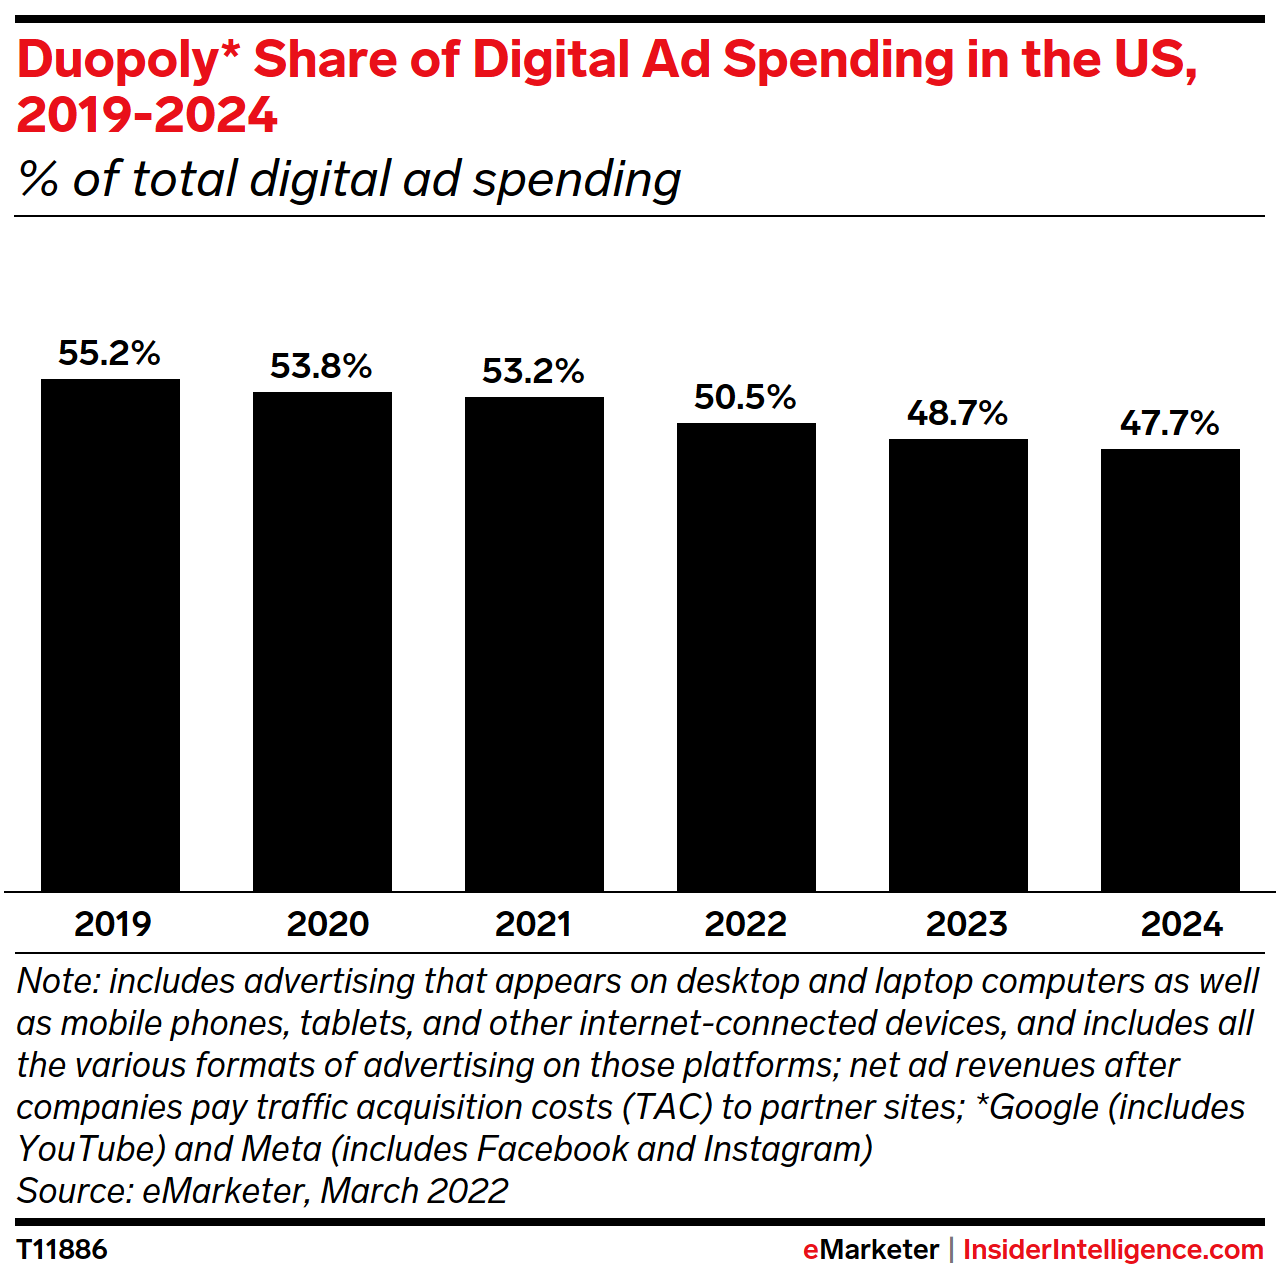 Duopoly Share of Digital Ad Spending in the US, 2019-2024 (% of total digital ad spending)